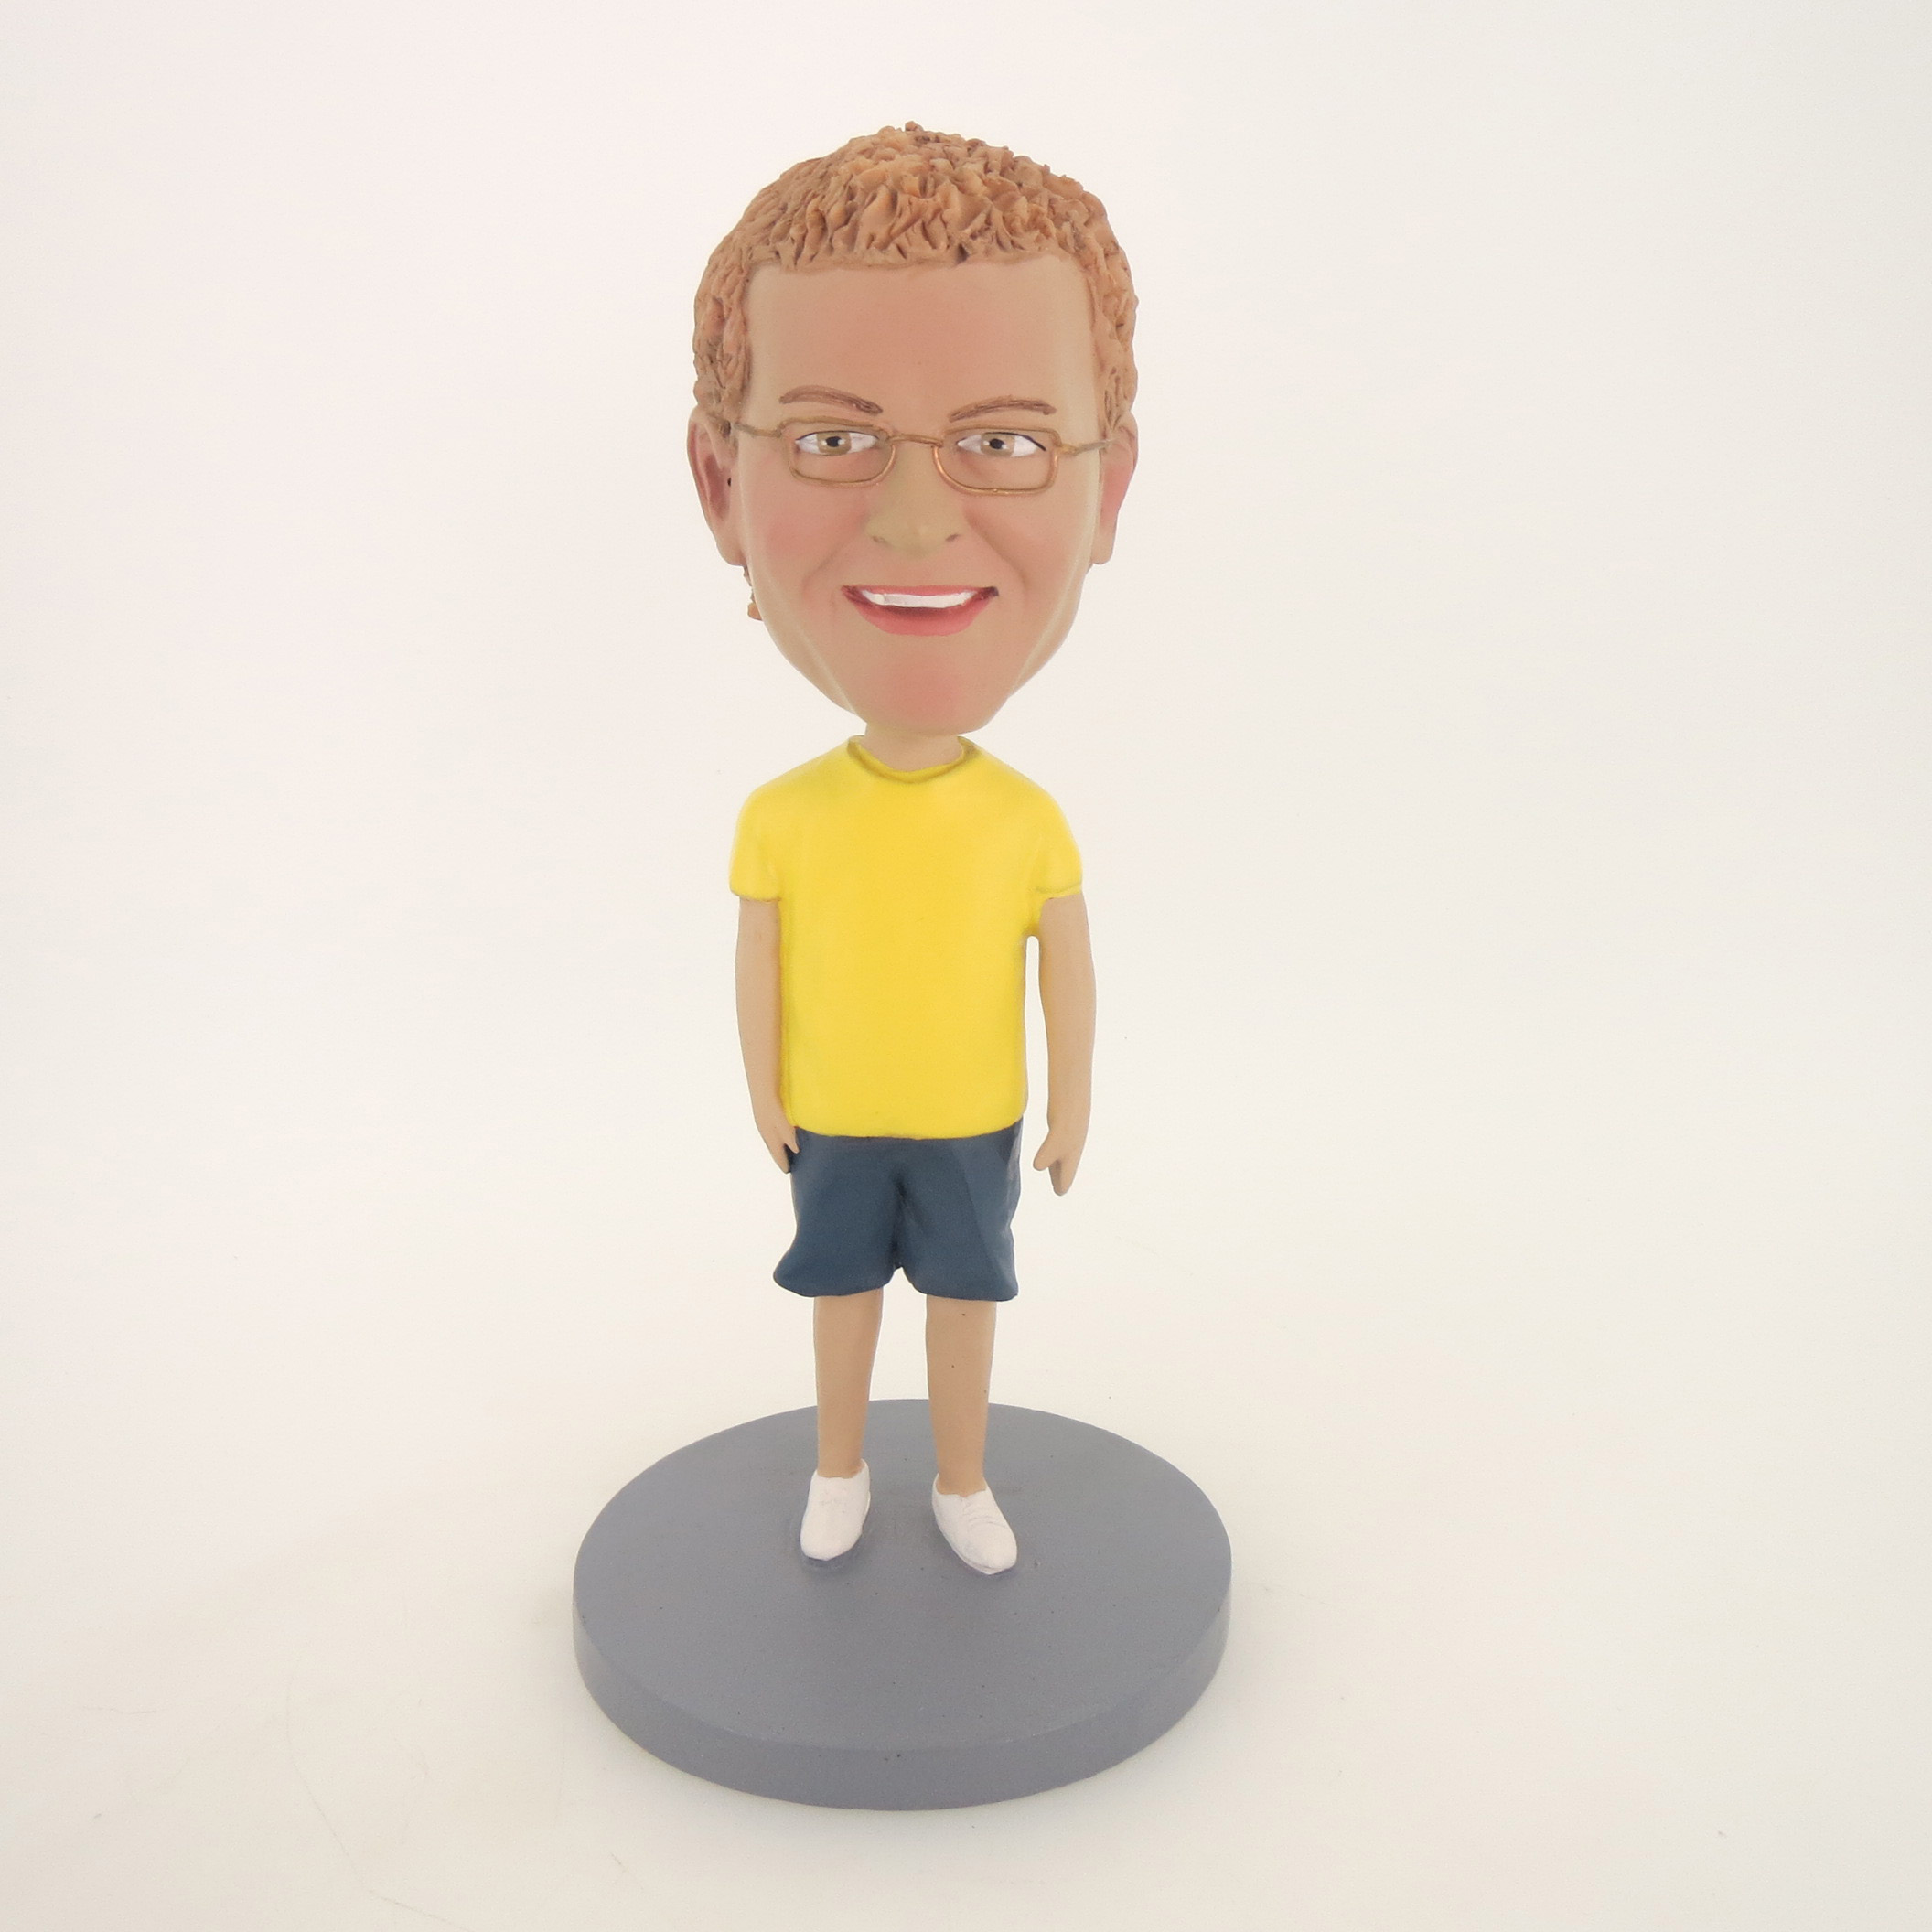 Picture of Custom Bobblehead Doll: Casual Man In Yellow and Blue